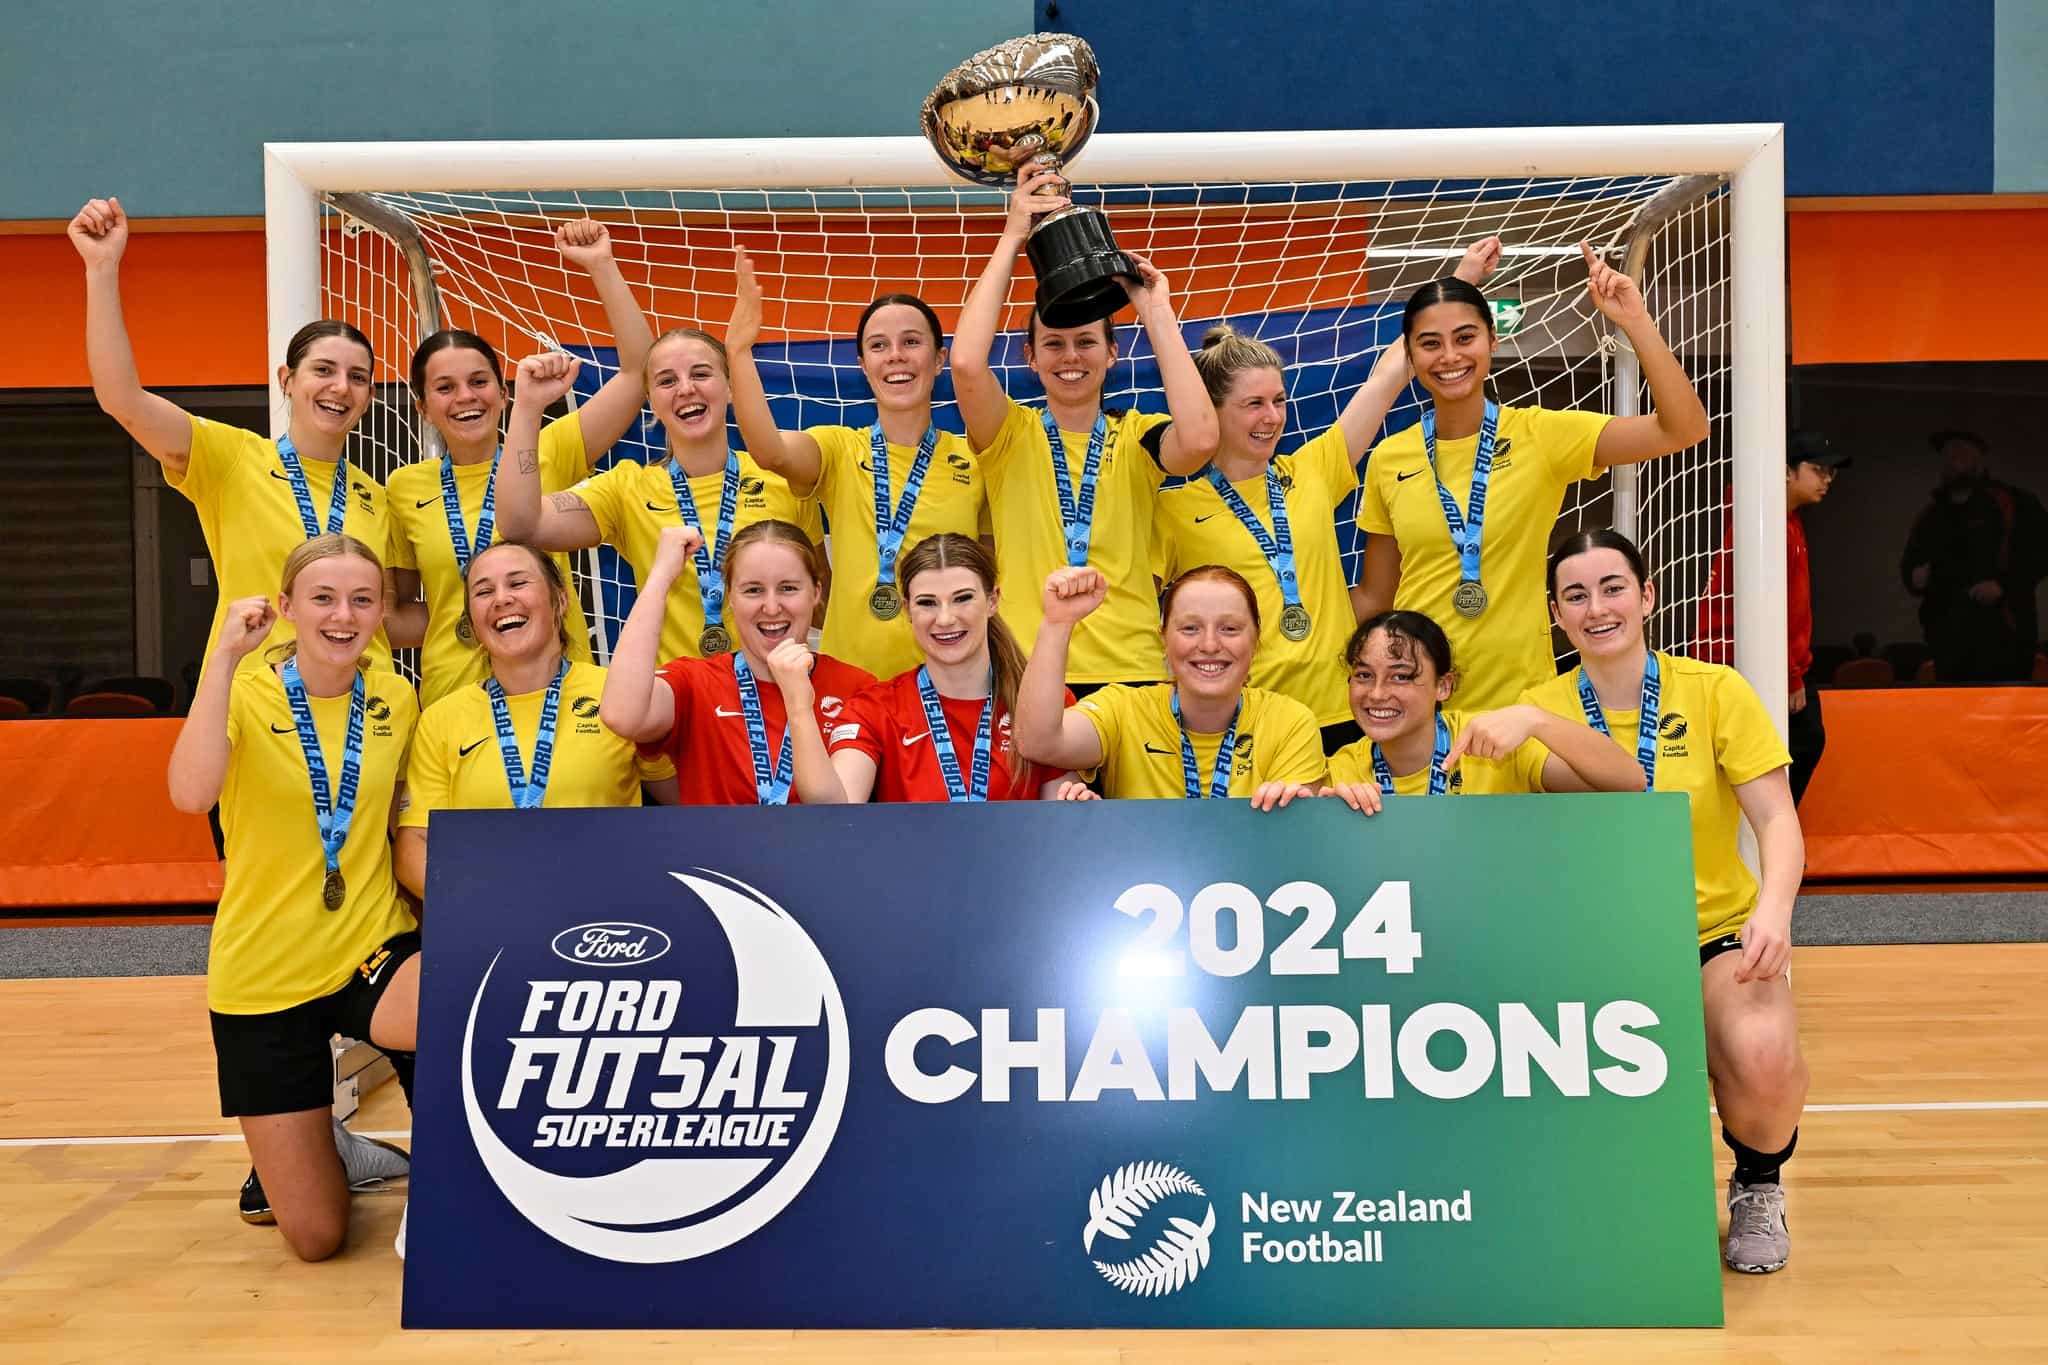 Capital Fustal players celebrate with the trophy after winning the Women’s Ford Futsal SuperLeague at Bruce Pulman Arena, Auckland, New Zealand on Monday 25 March 2024.
Photo credit: Alan Lee / www.photosport.nz